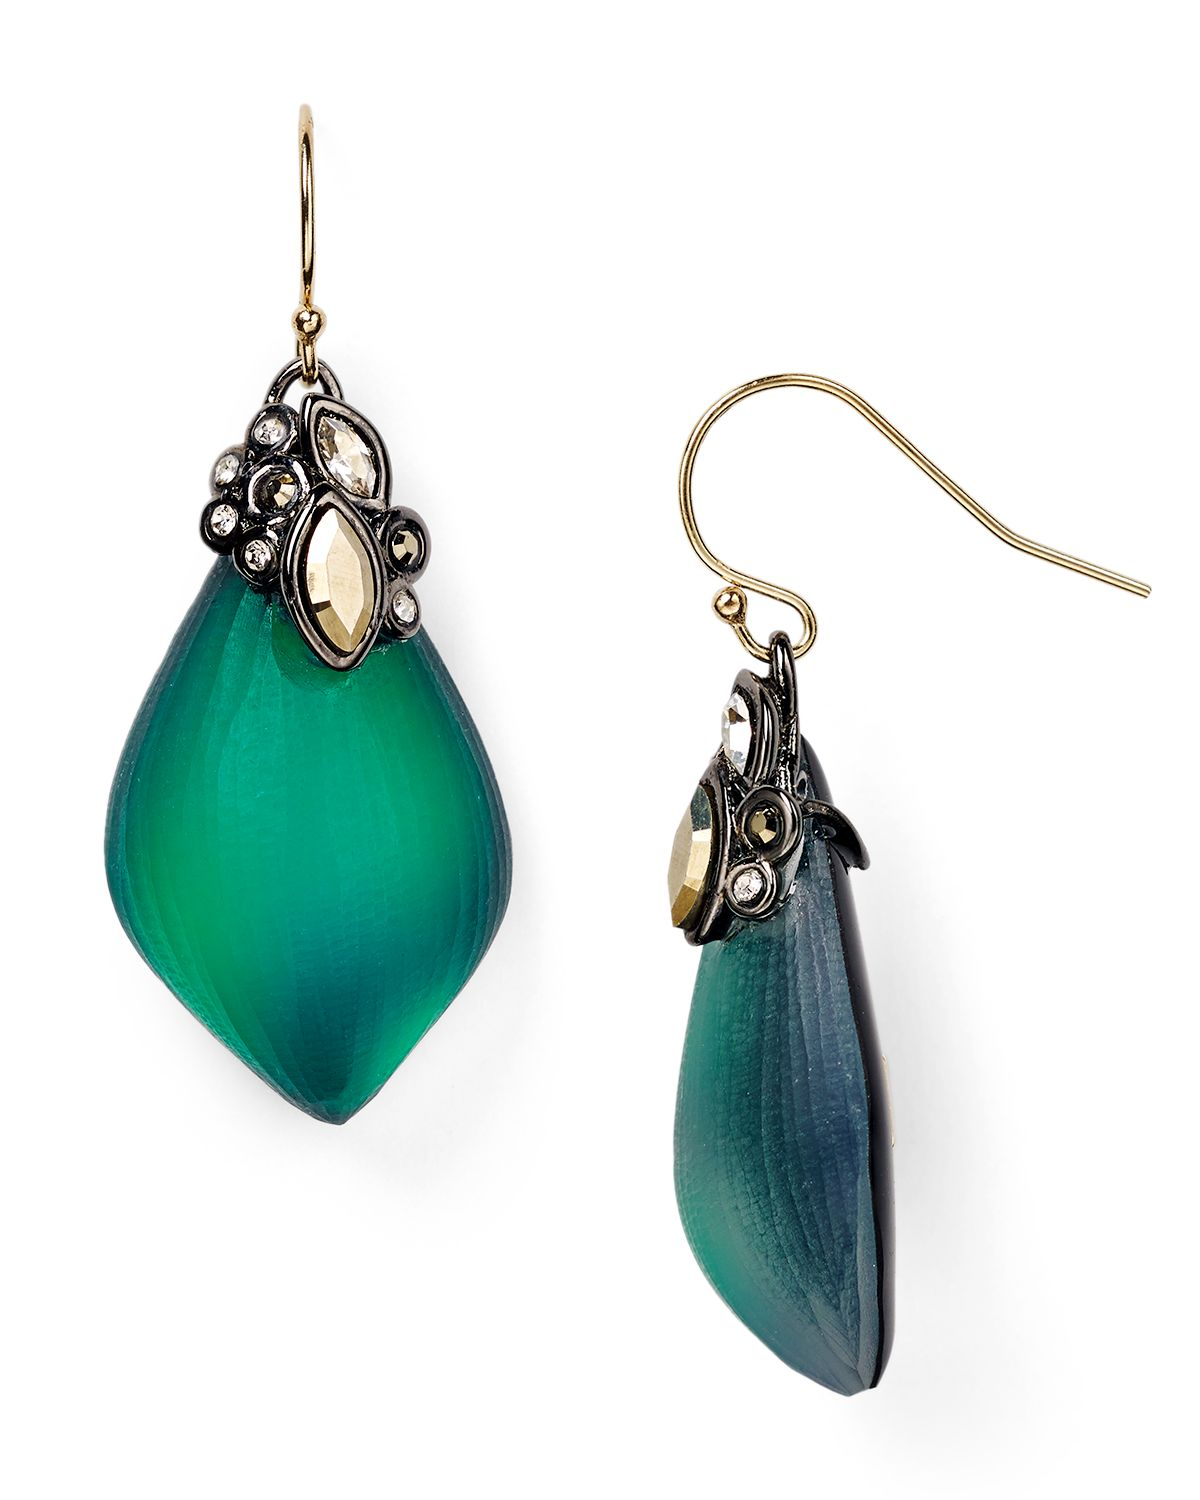 Lyst - Alexis Bittar Crystal Lace Capped Lucite Earrings in Green